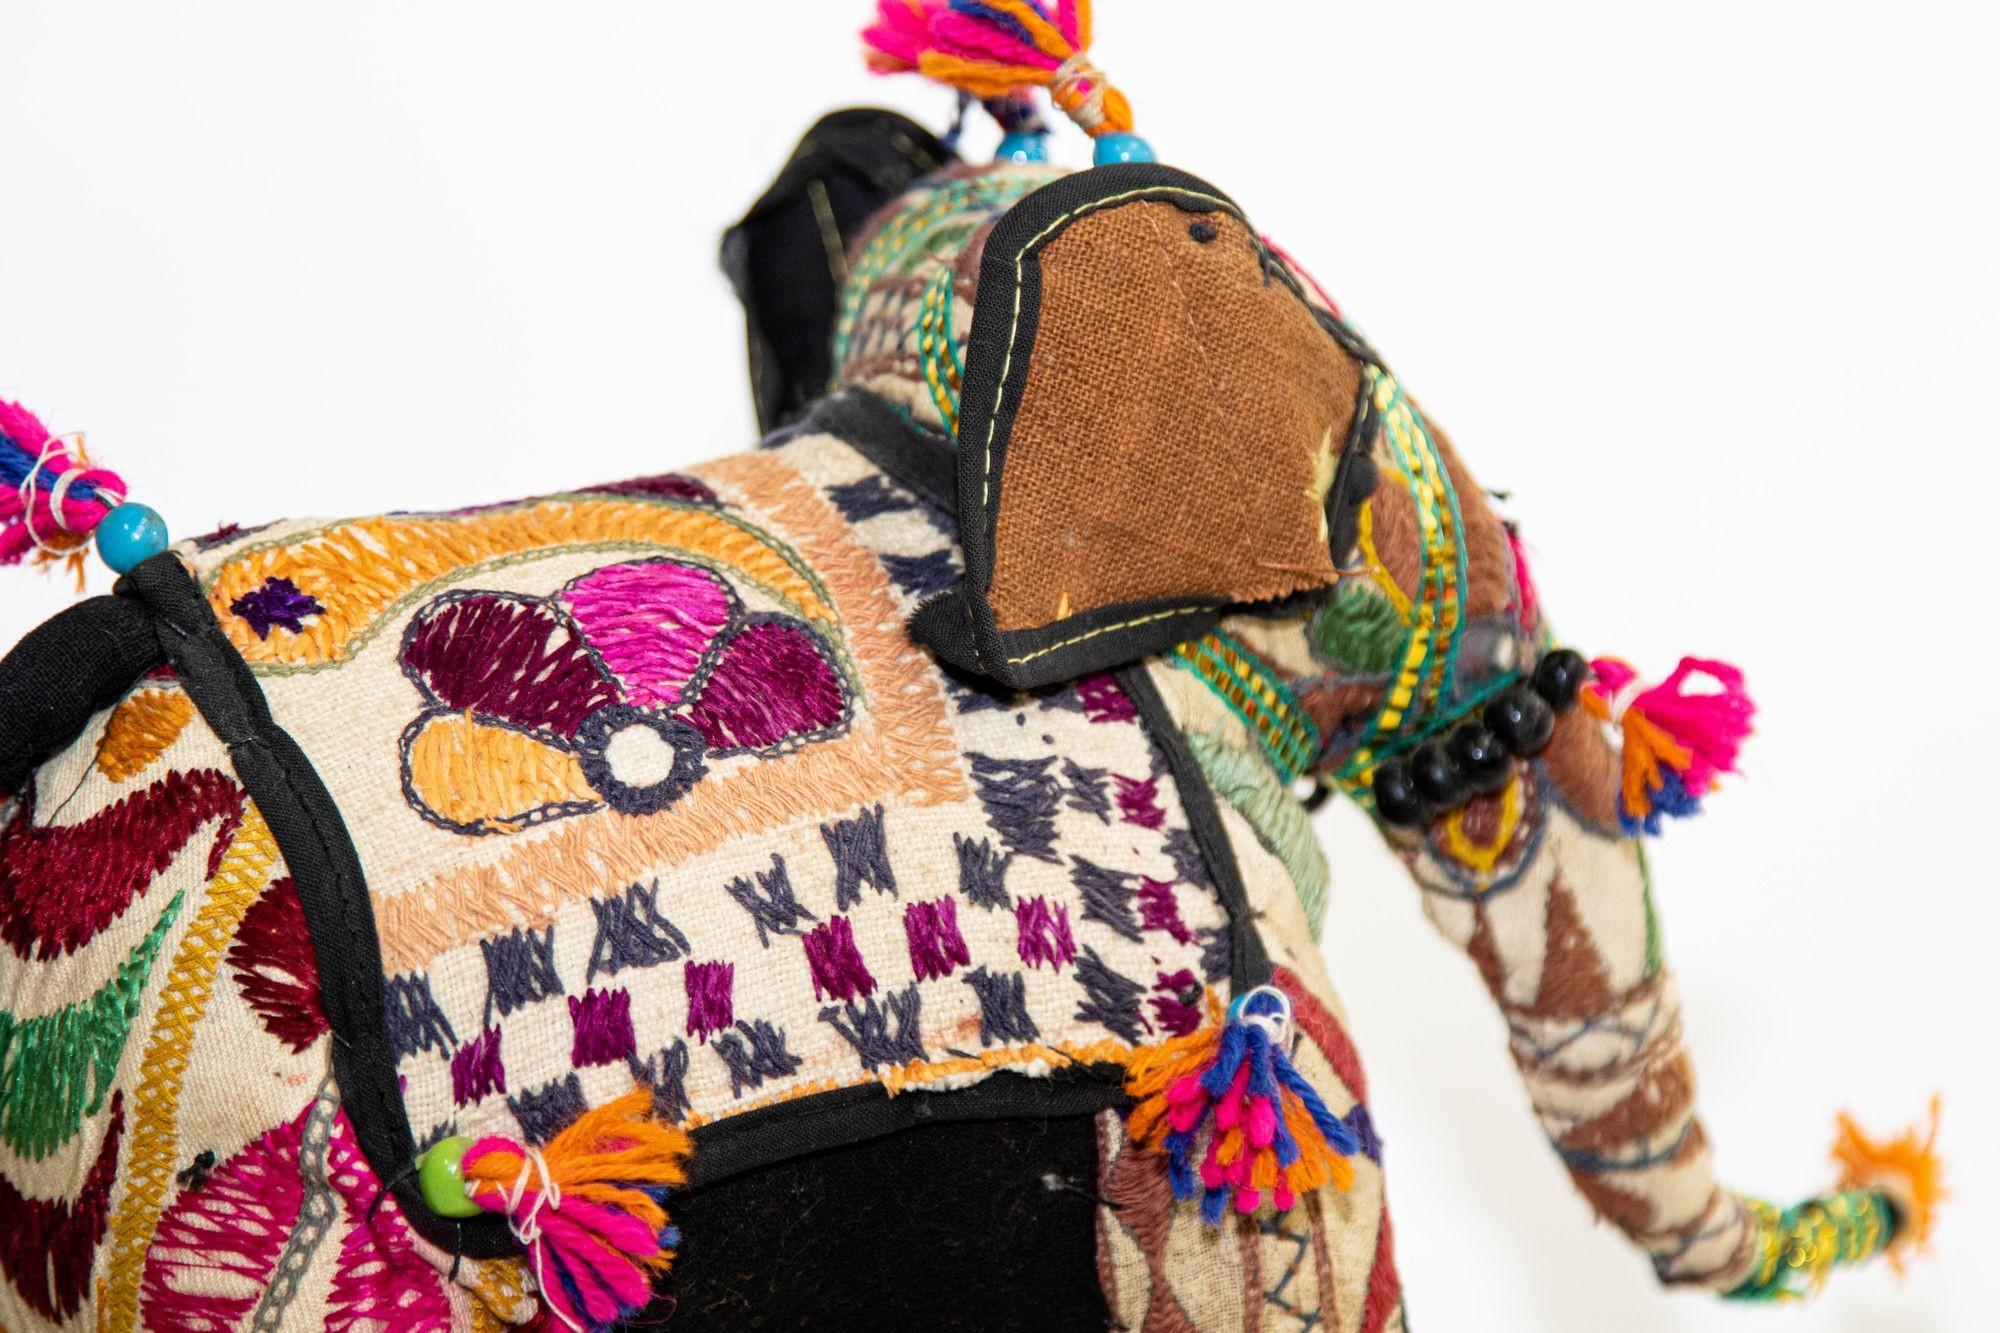 Vintage Raj Hand-Crafted Stuffed Cotton Embroidered Elephant, India, 1950 For Sale 3